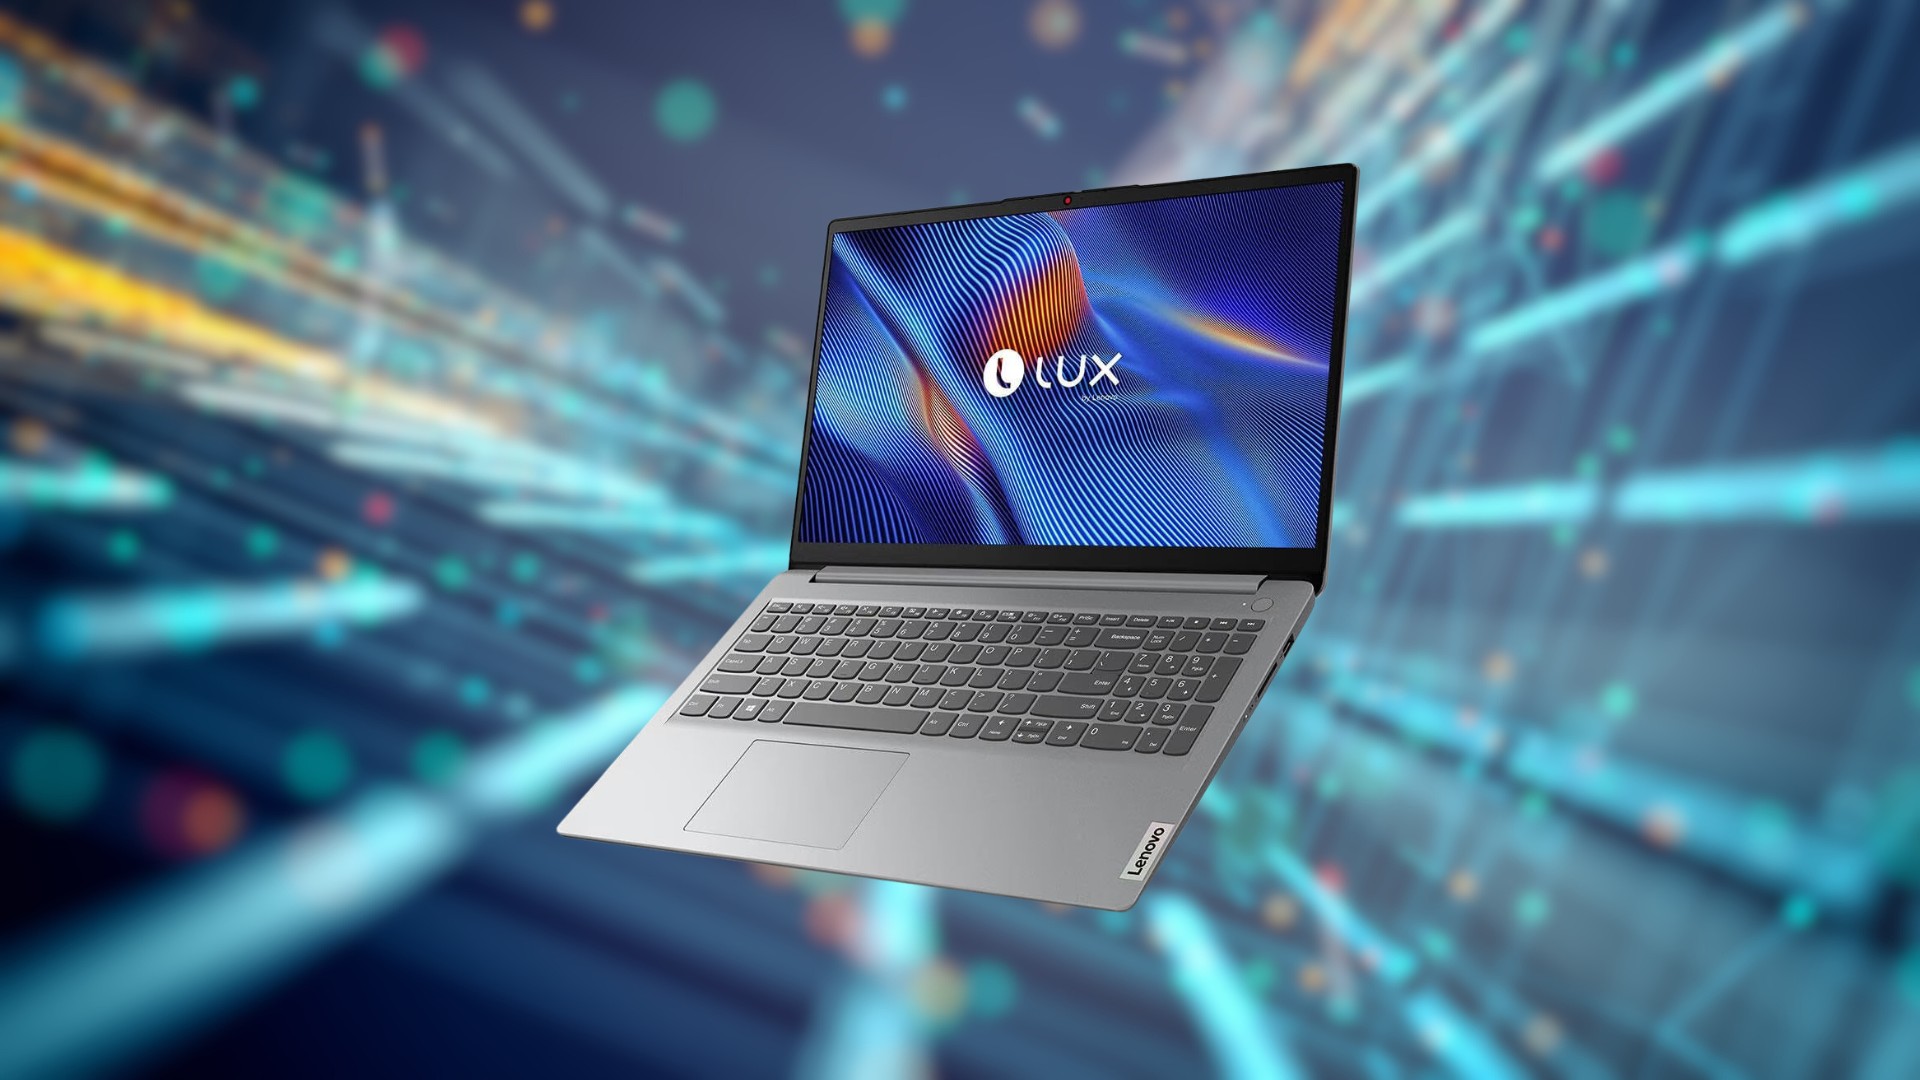 Lenovo Lux: Linux-based system provides extinct language and accessibility functions